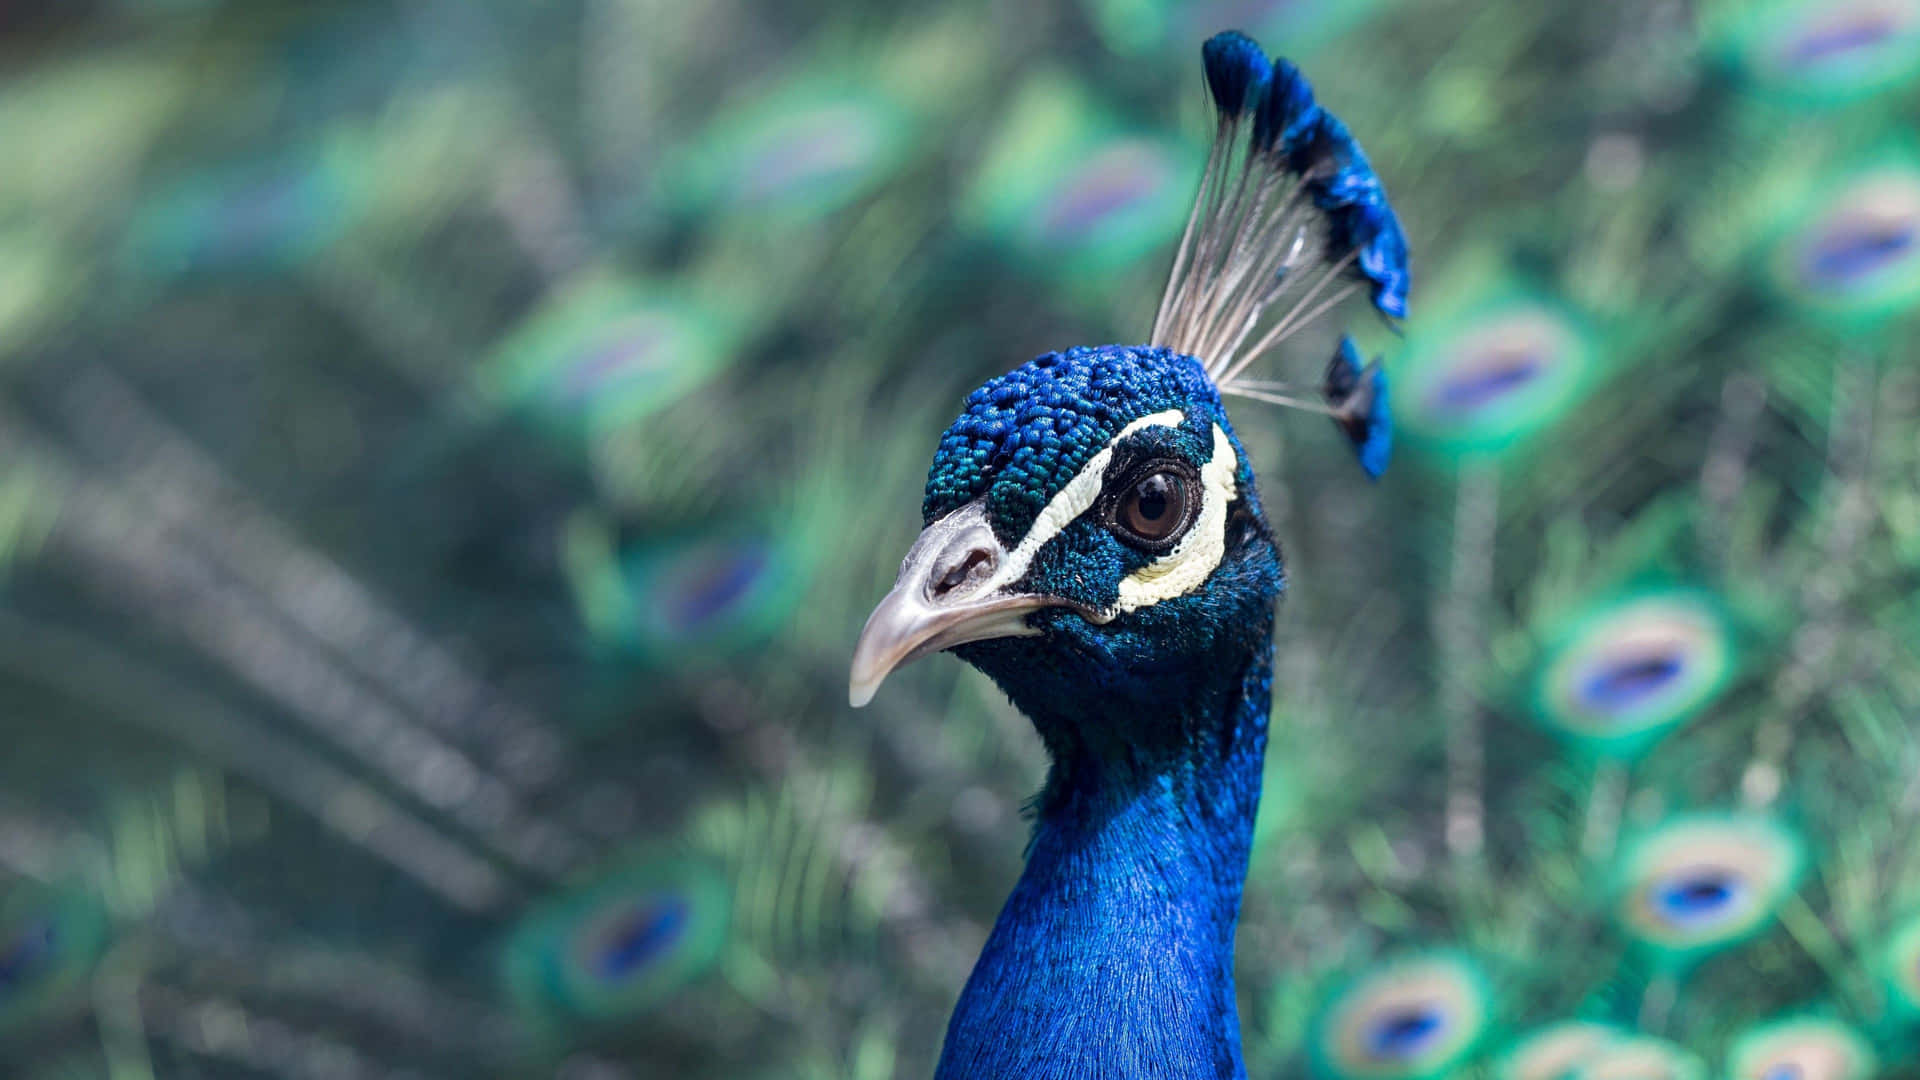 Majestic Peacock Admiring Its Magnificent Plumage